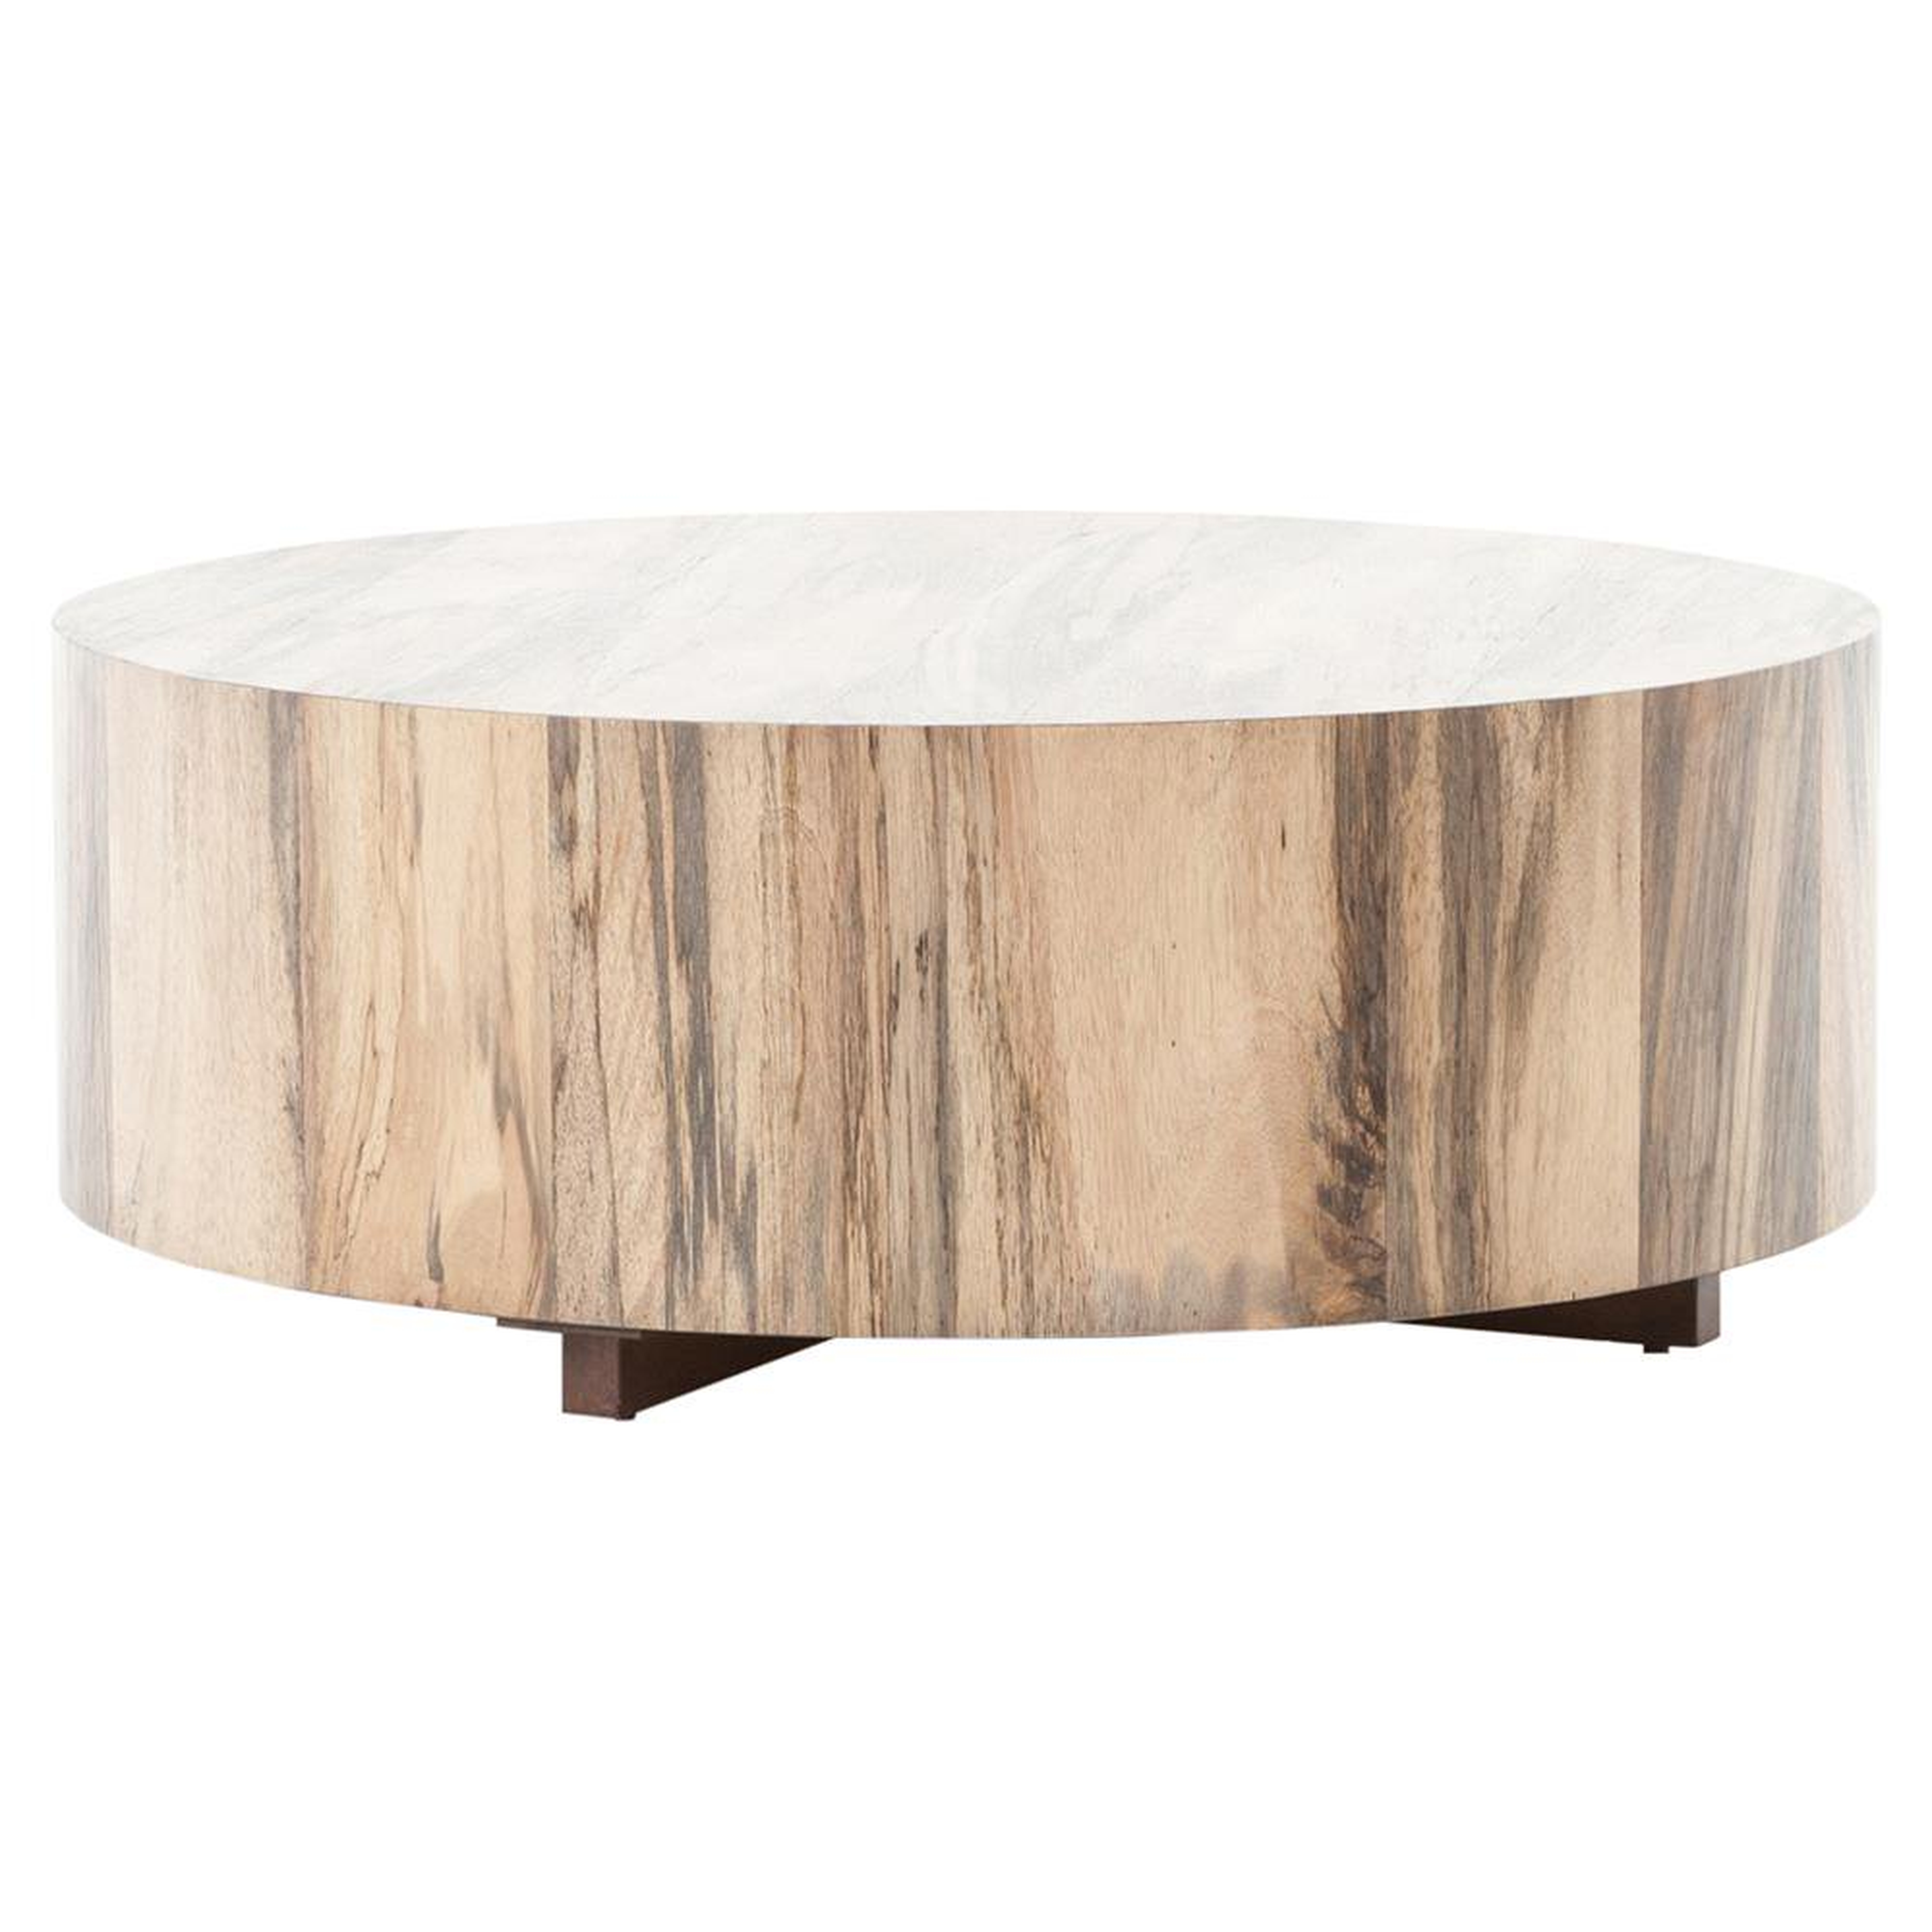 Hudson Spalted Primavera Round Wood Coffee Table - Crate and Barrel